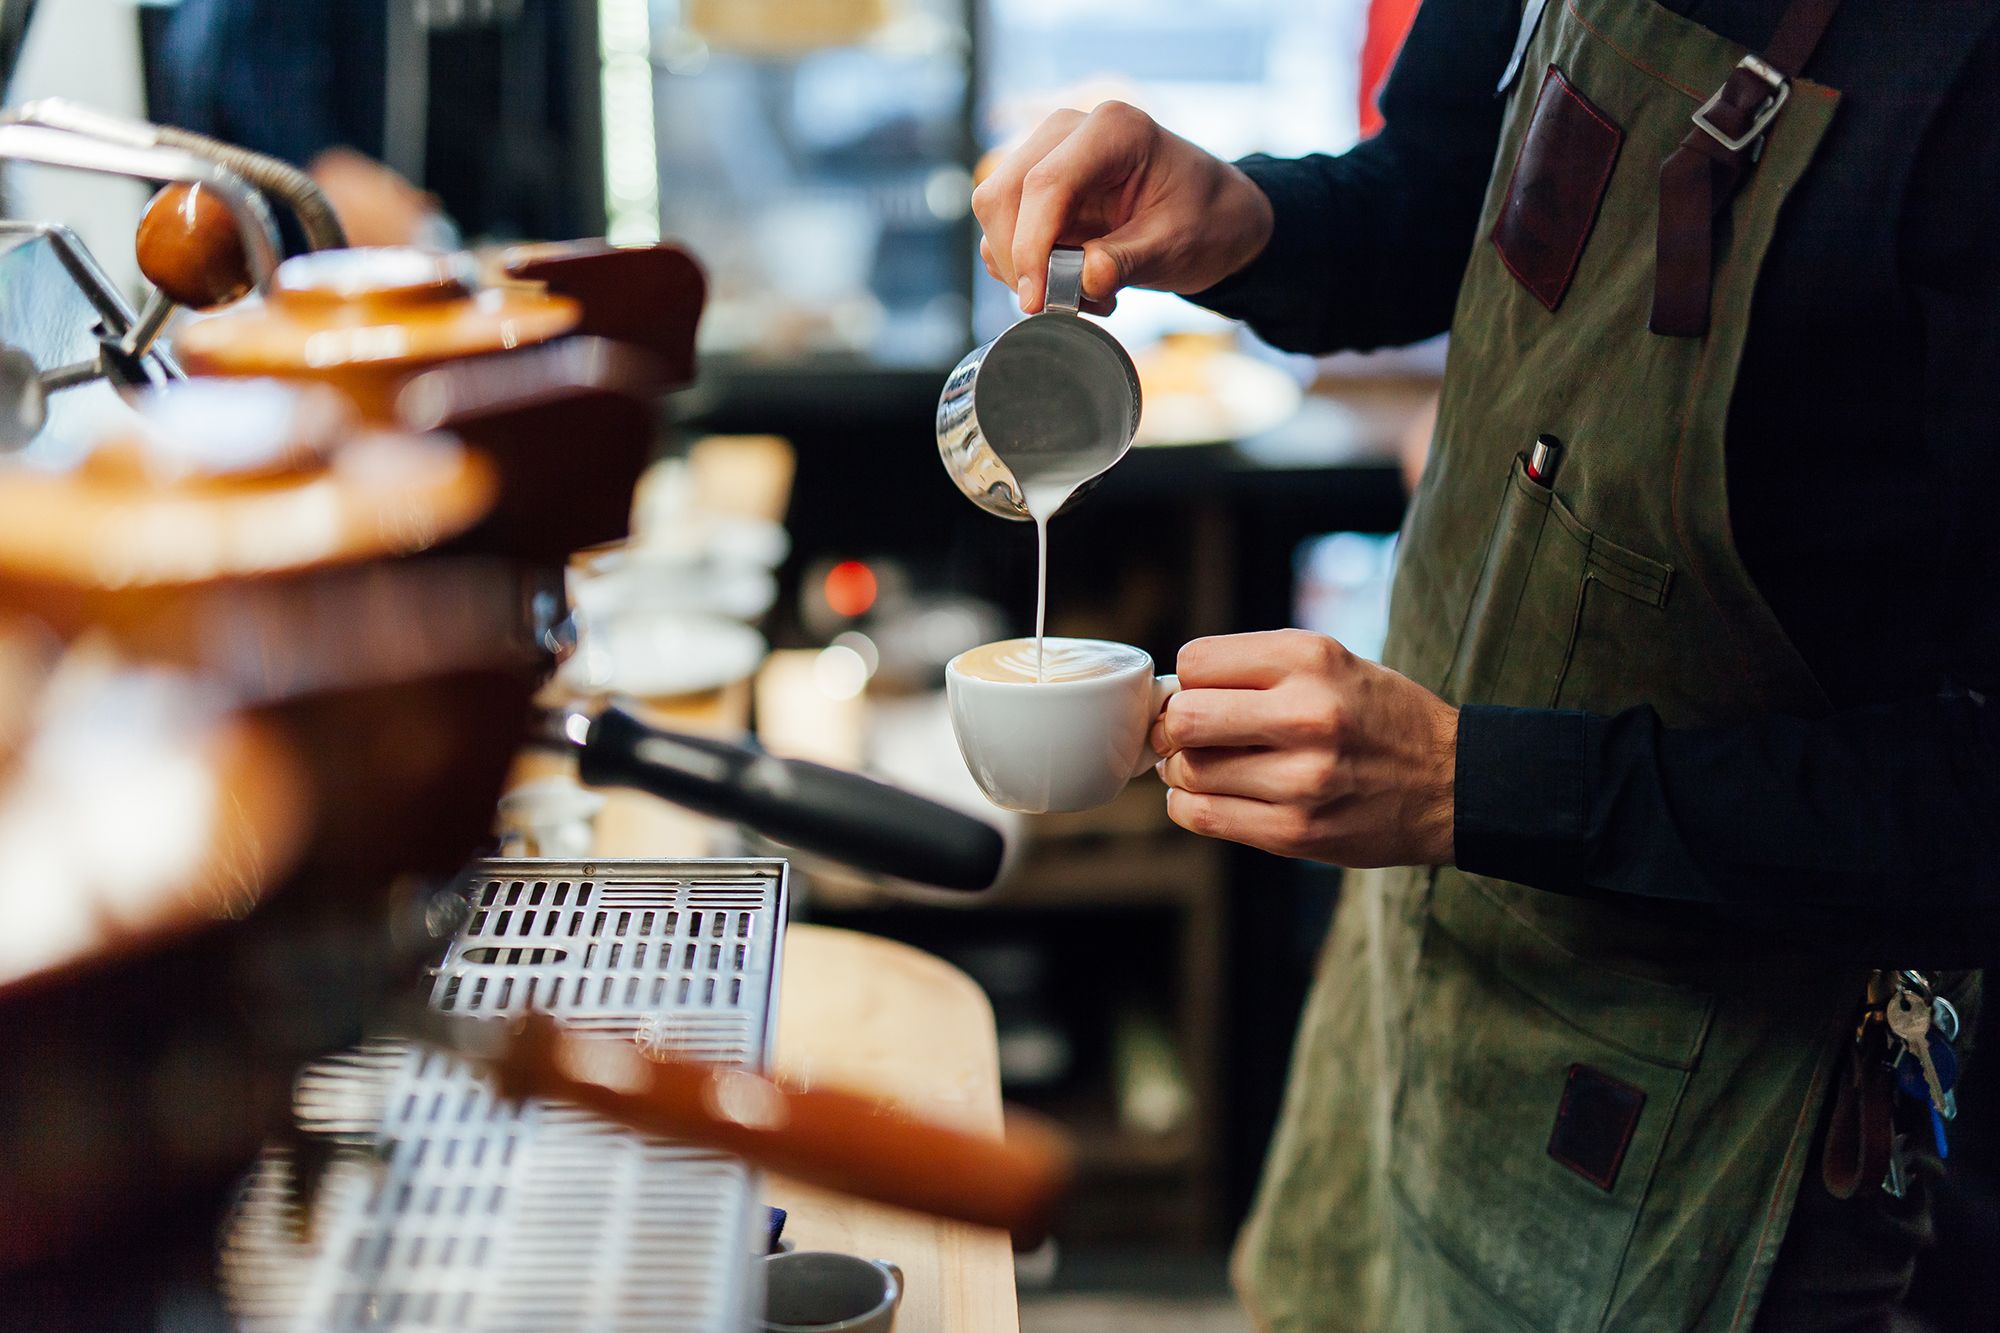 16 Most Profitable Items in a Coffee Shop - Parts Town